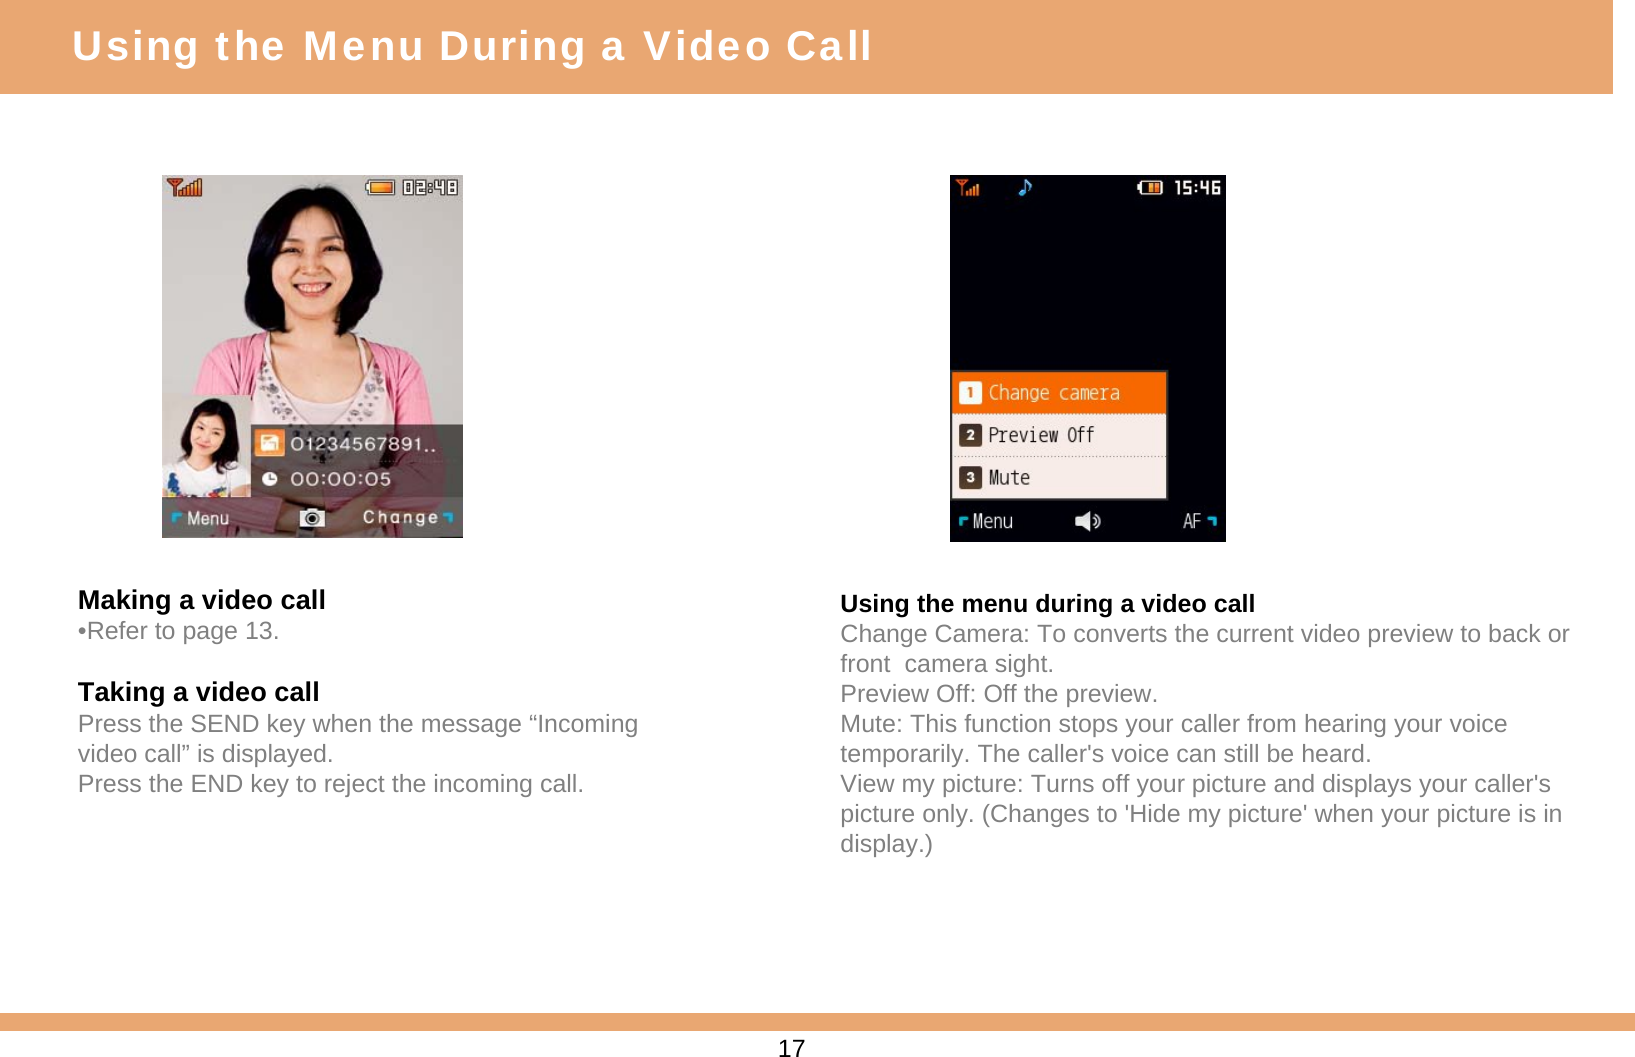 Making a video call•Refer to page 13.Taking a video callPress the SEND key when the message “Incoming video call” is displayed.Press the END key to reject the incoming call.Using the menu during a video callChange Camera: To converts the current video preview to back or front  camera sight.Preview Off: Off the preview.Mute: This function stops your caller from hearing your voice temporarily. The caller&apos;s voice can still be heard.View my picture: Turns off your picture and displays your caller&apos;s picture only. (Changes to &apos;Hide my picture&apos; when your picture is in display.)Using the Menu During a Video Call17